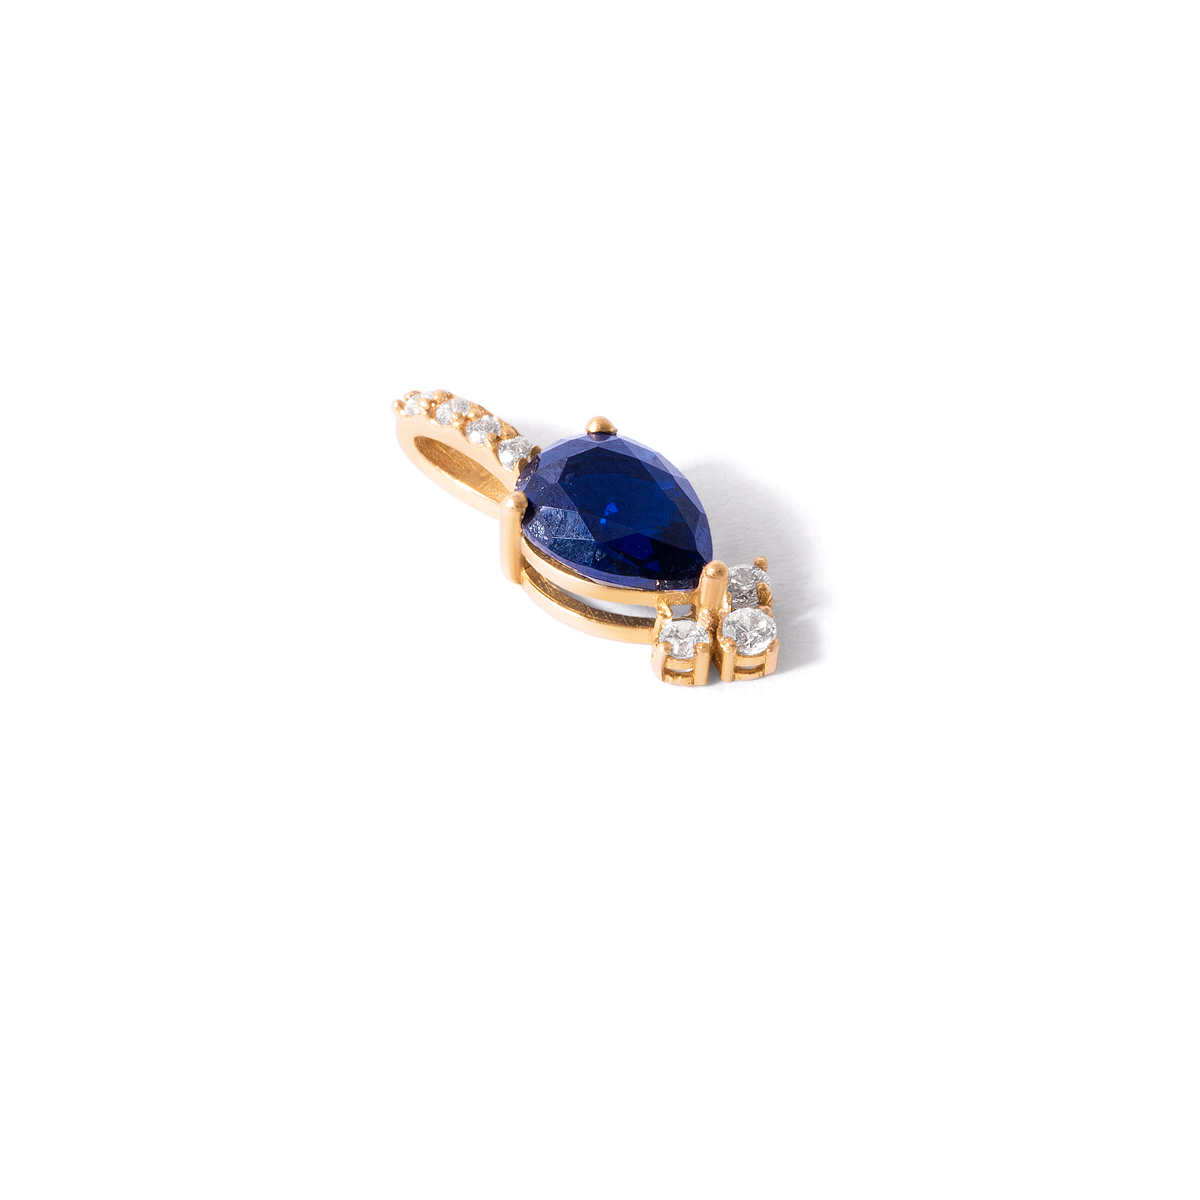 Atri gold pendant with navy blue tears g